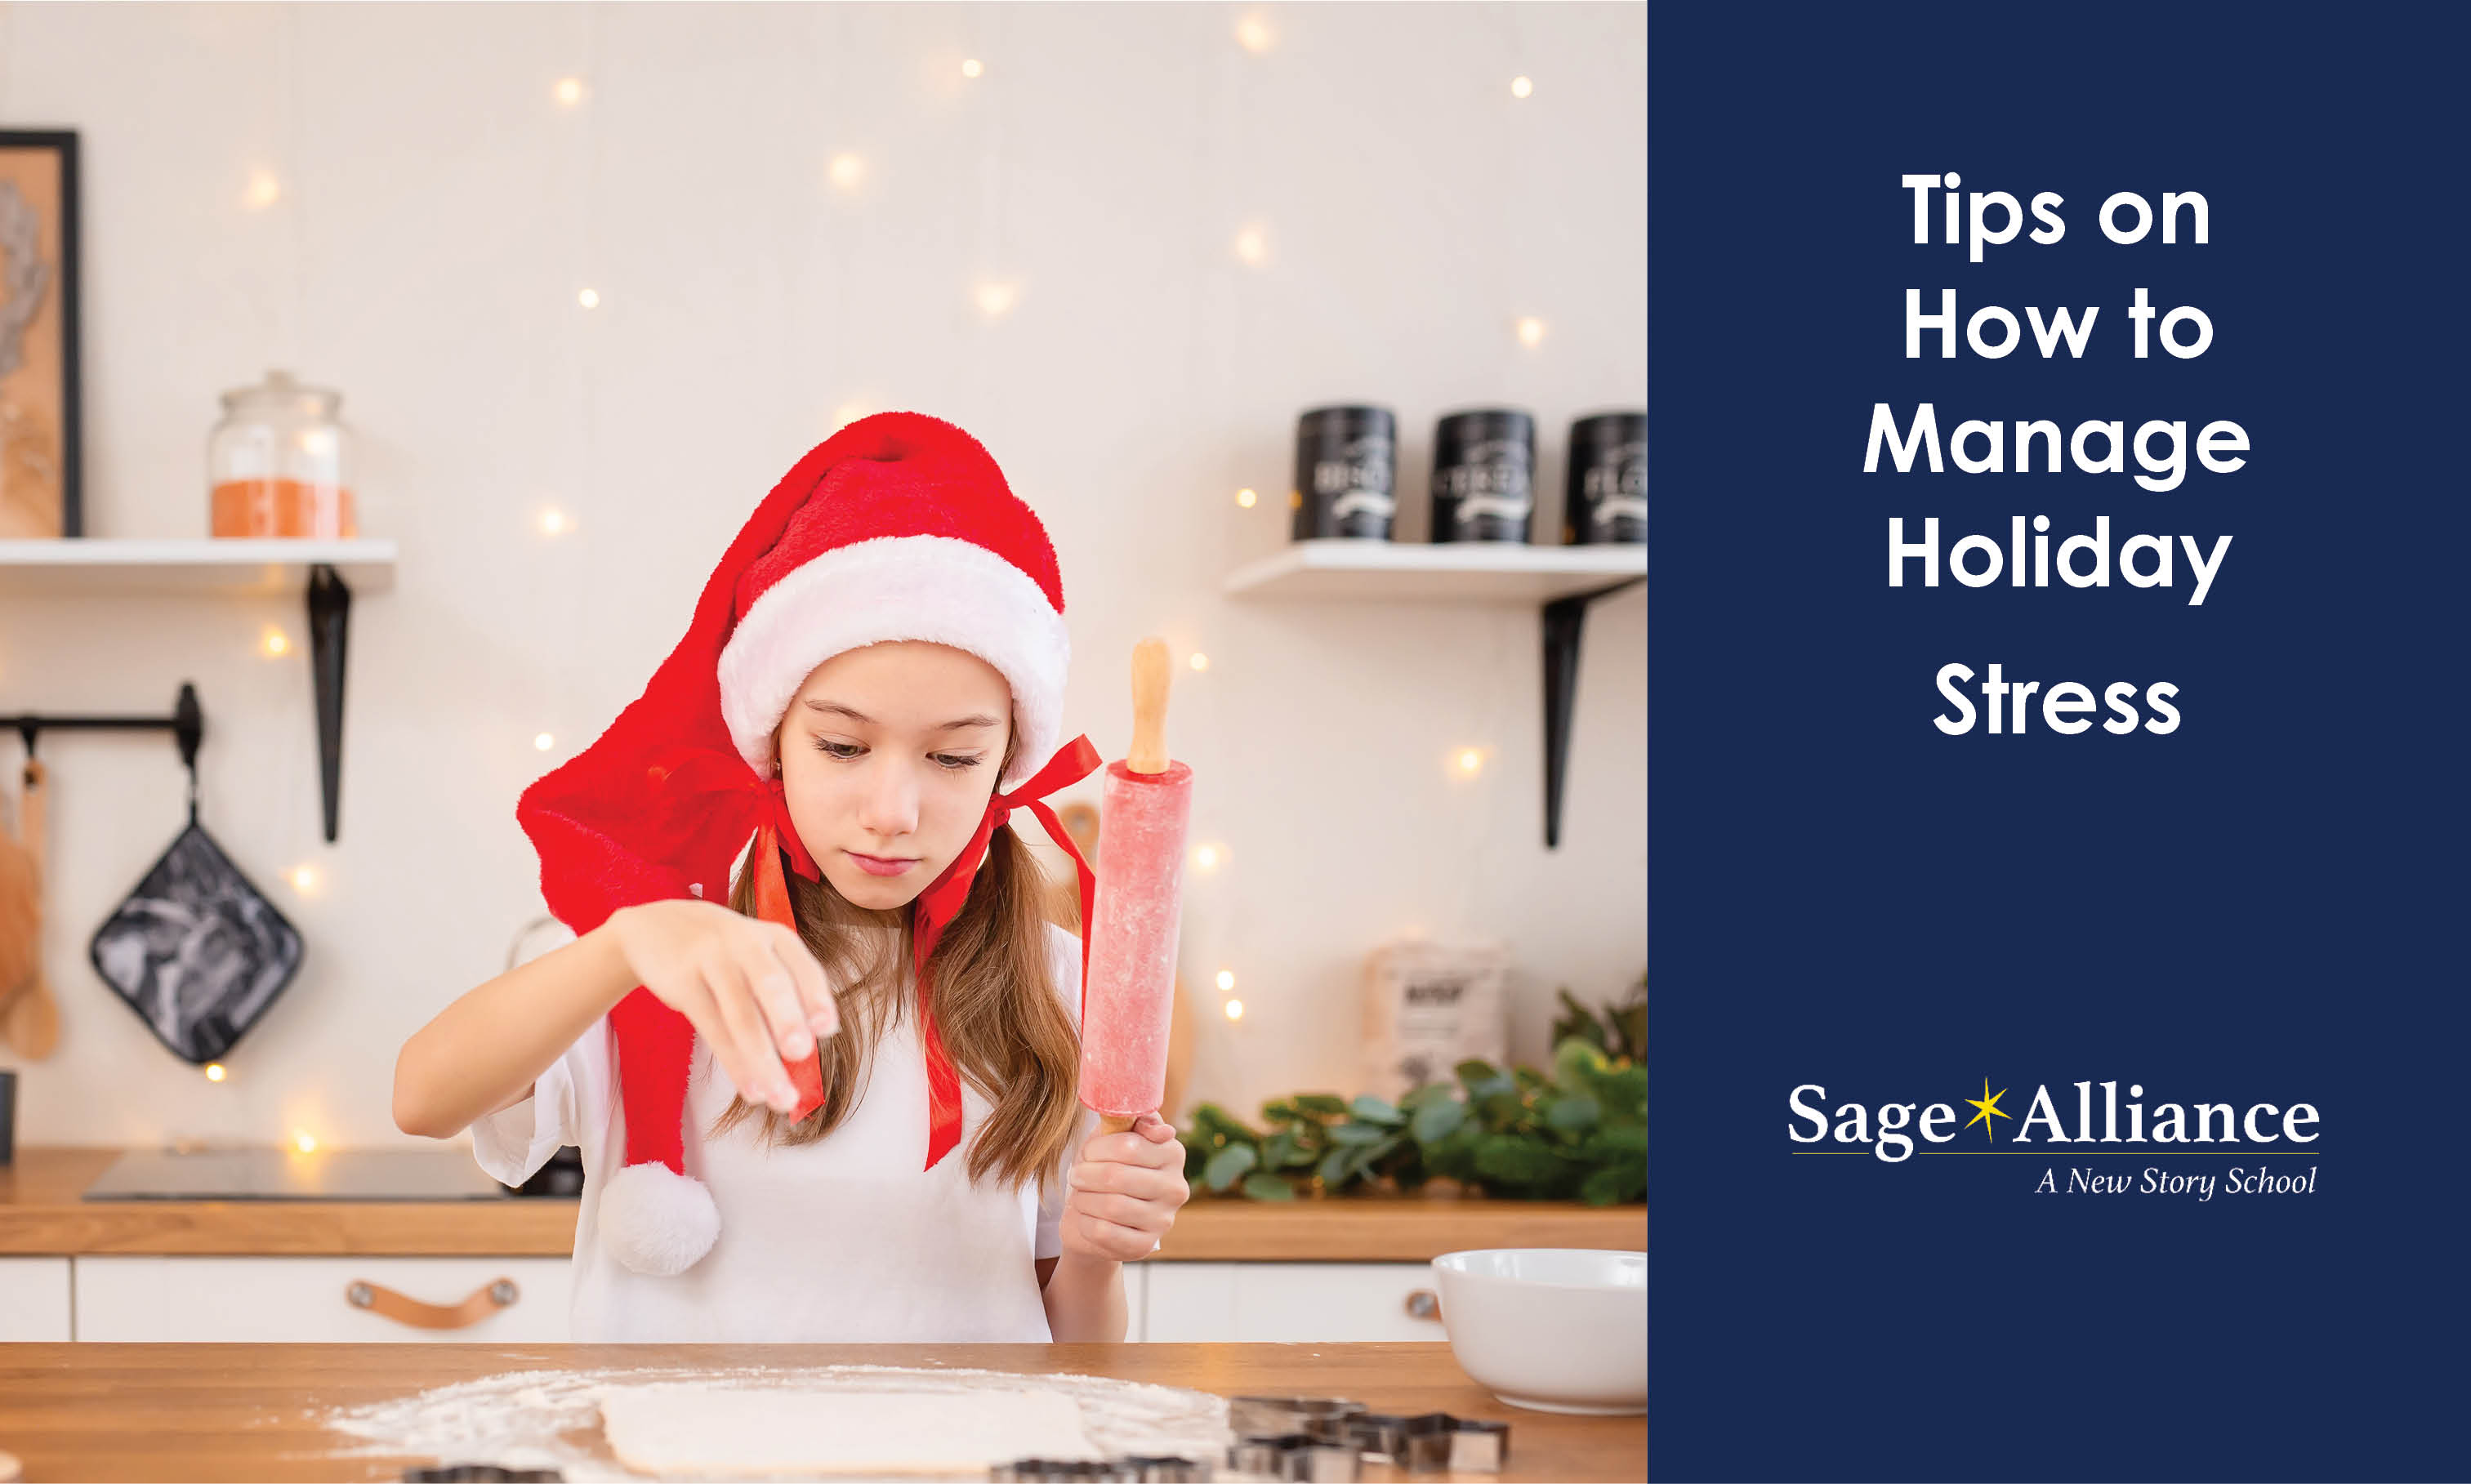 Tips on How to Manage Holiday Stress